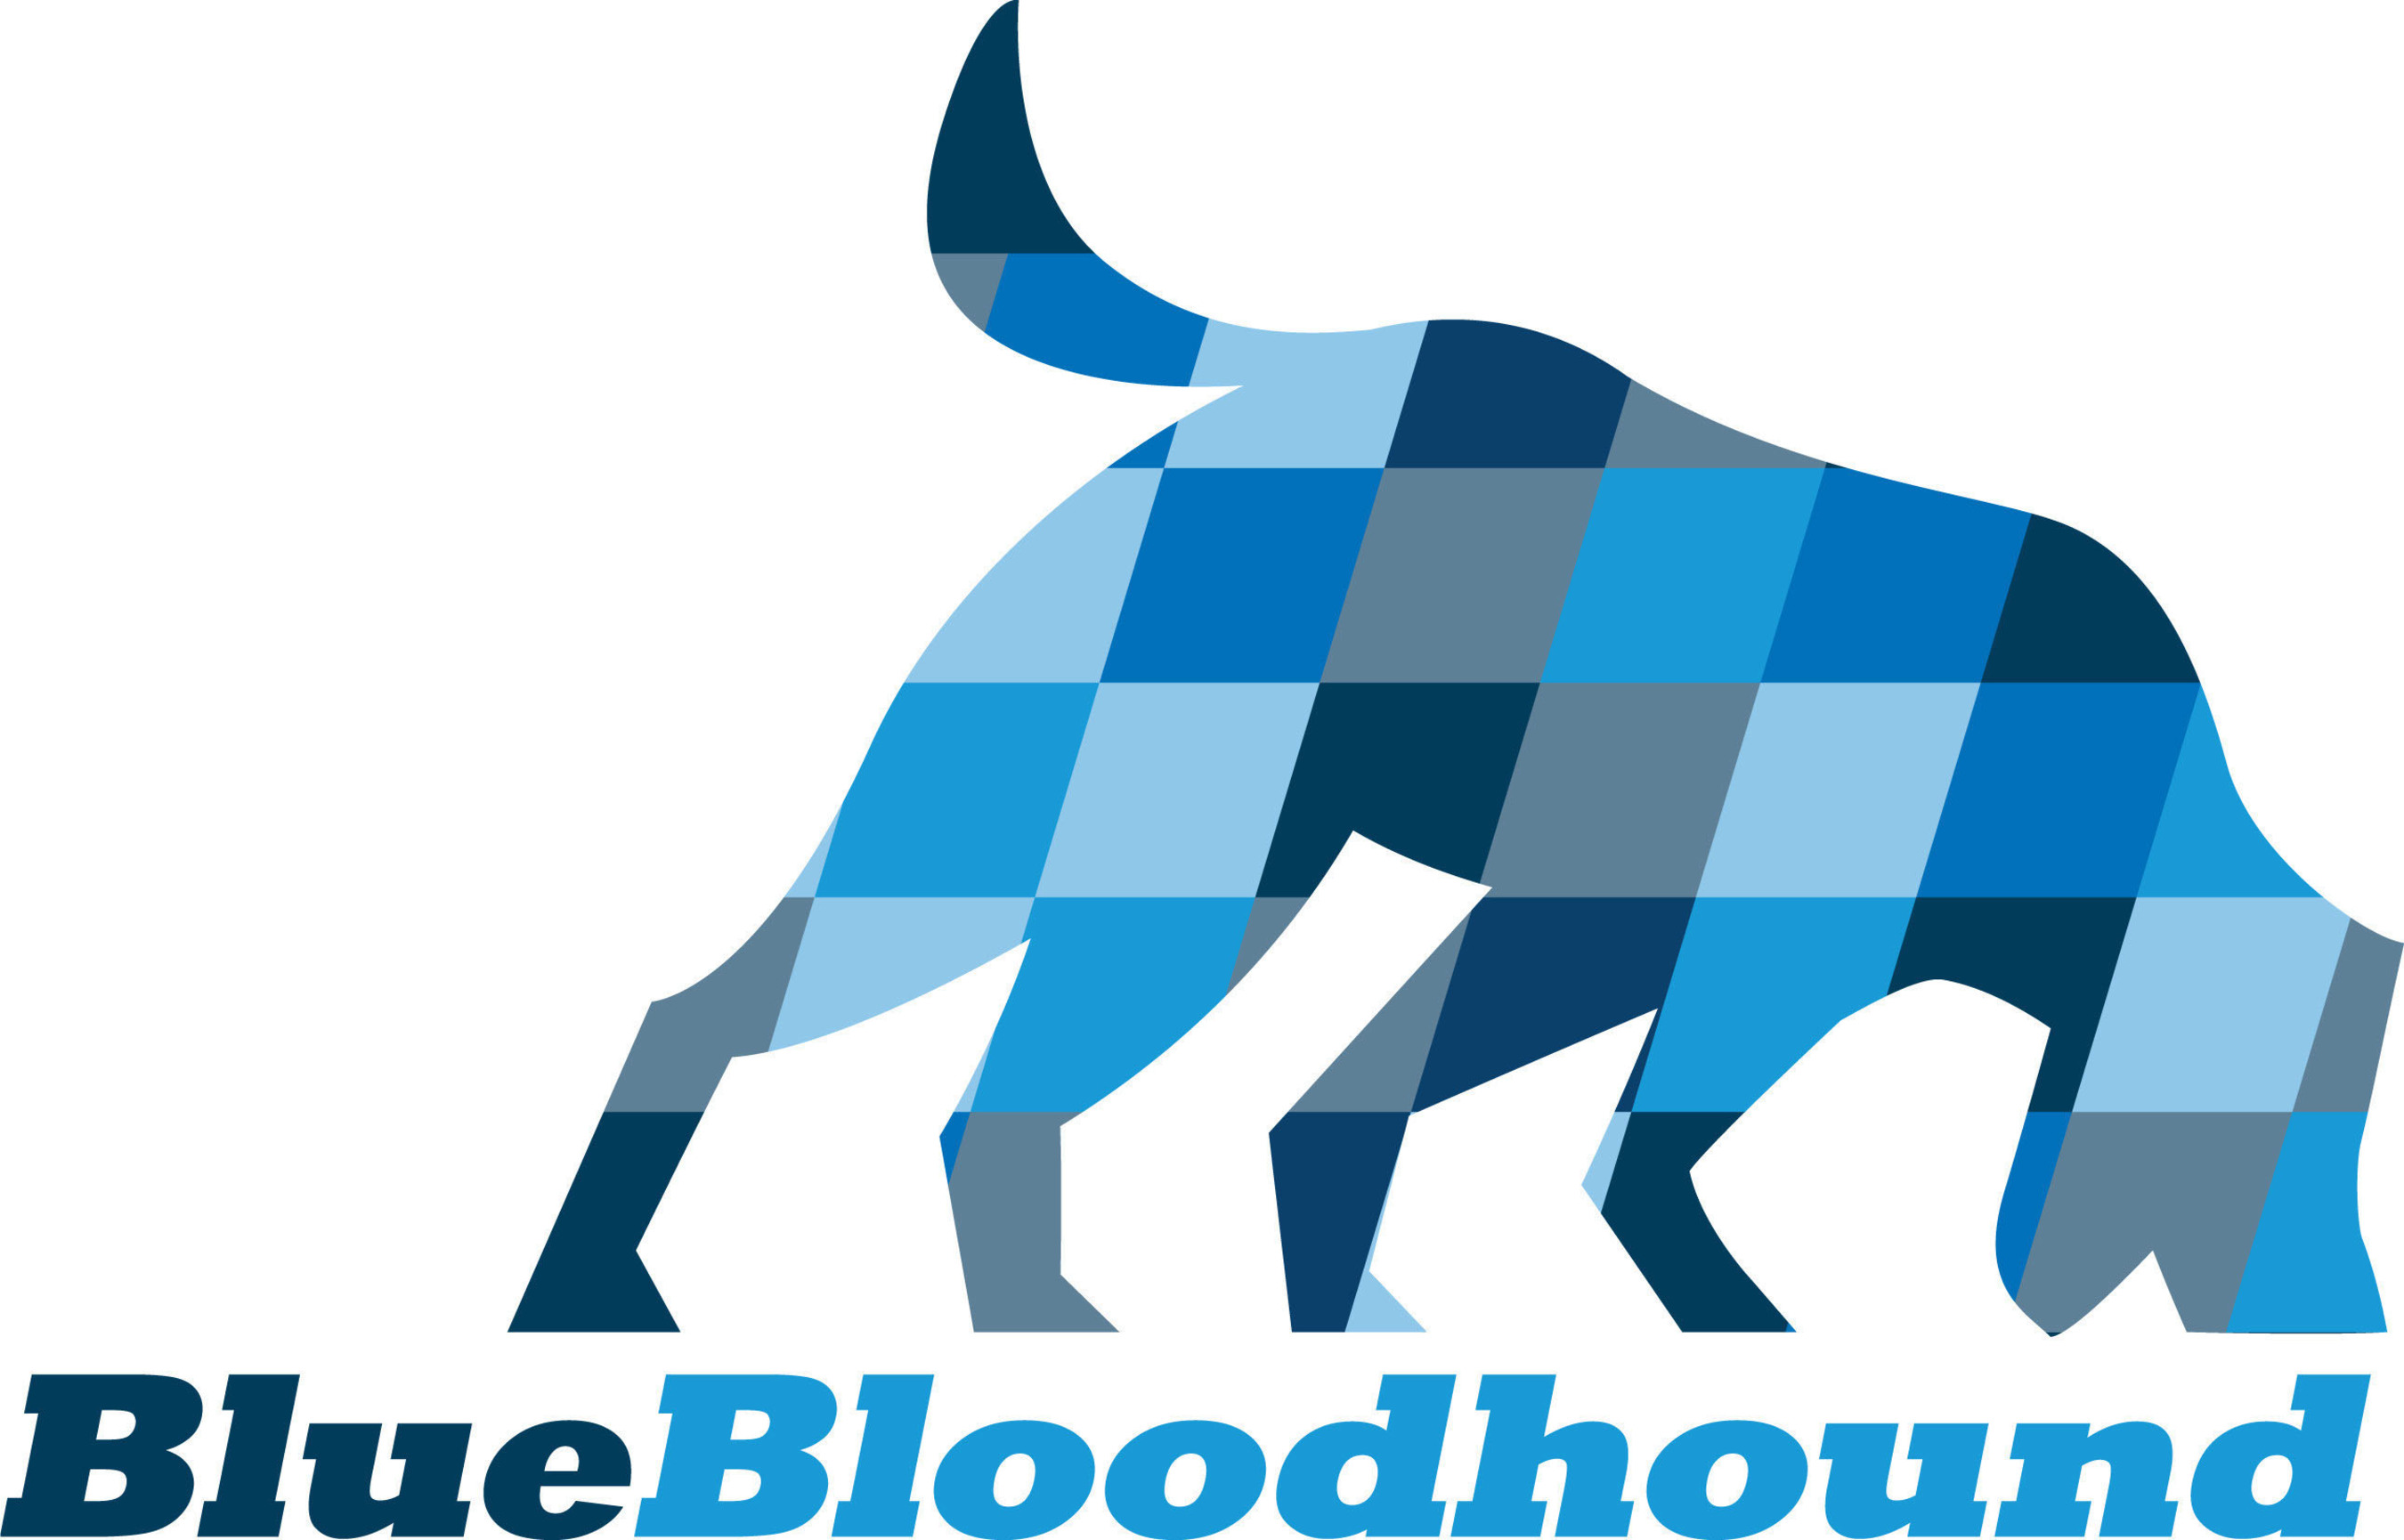 Blue Bloodhound is revolutionizing the trucking industry through its new, online marketplace by connecting qualified truck drivers in need of extra work, with motor carriers posting immediate pay-by-the-run local and long-haul jobs throughout the United States.